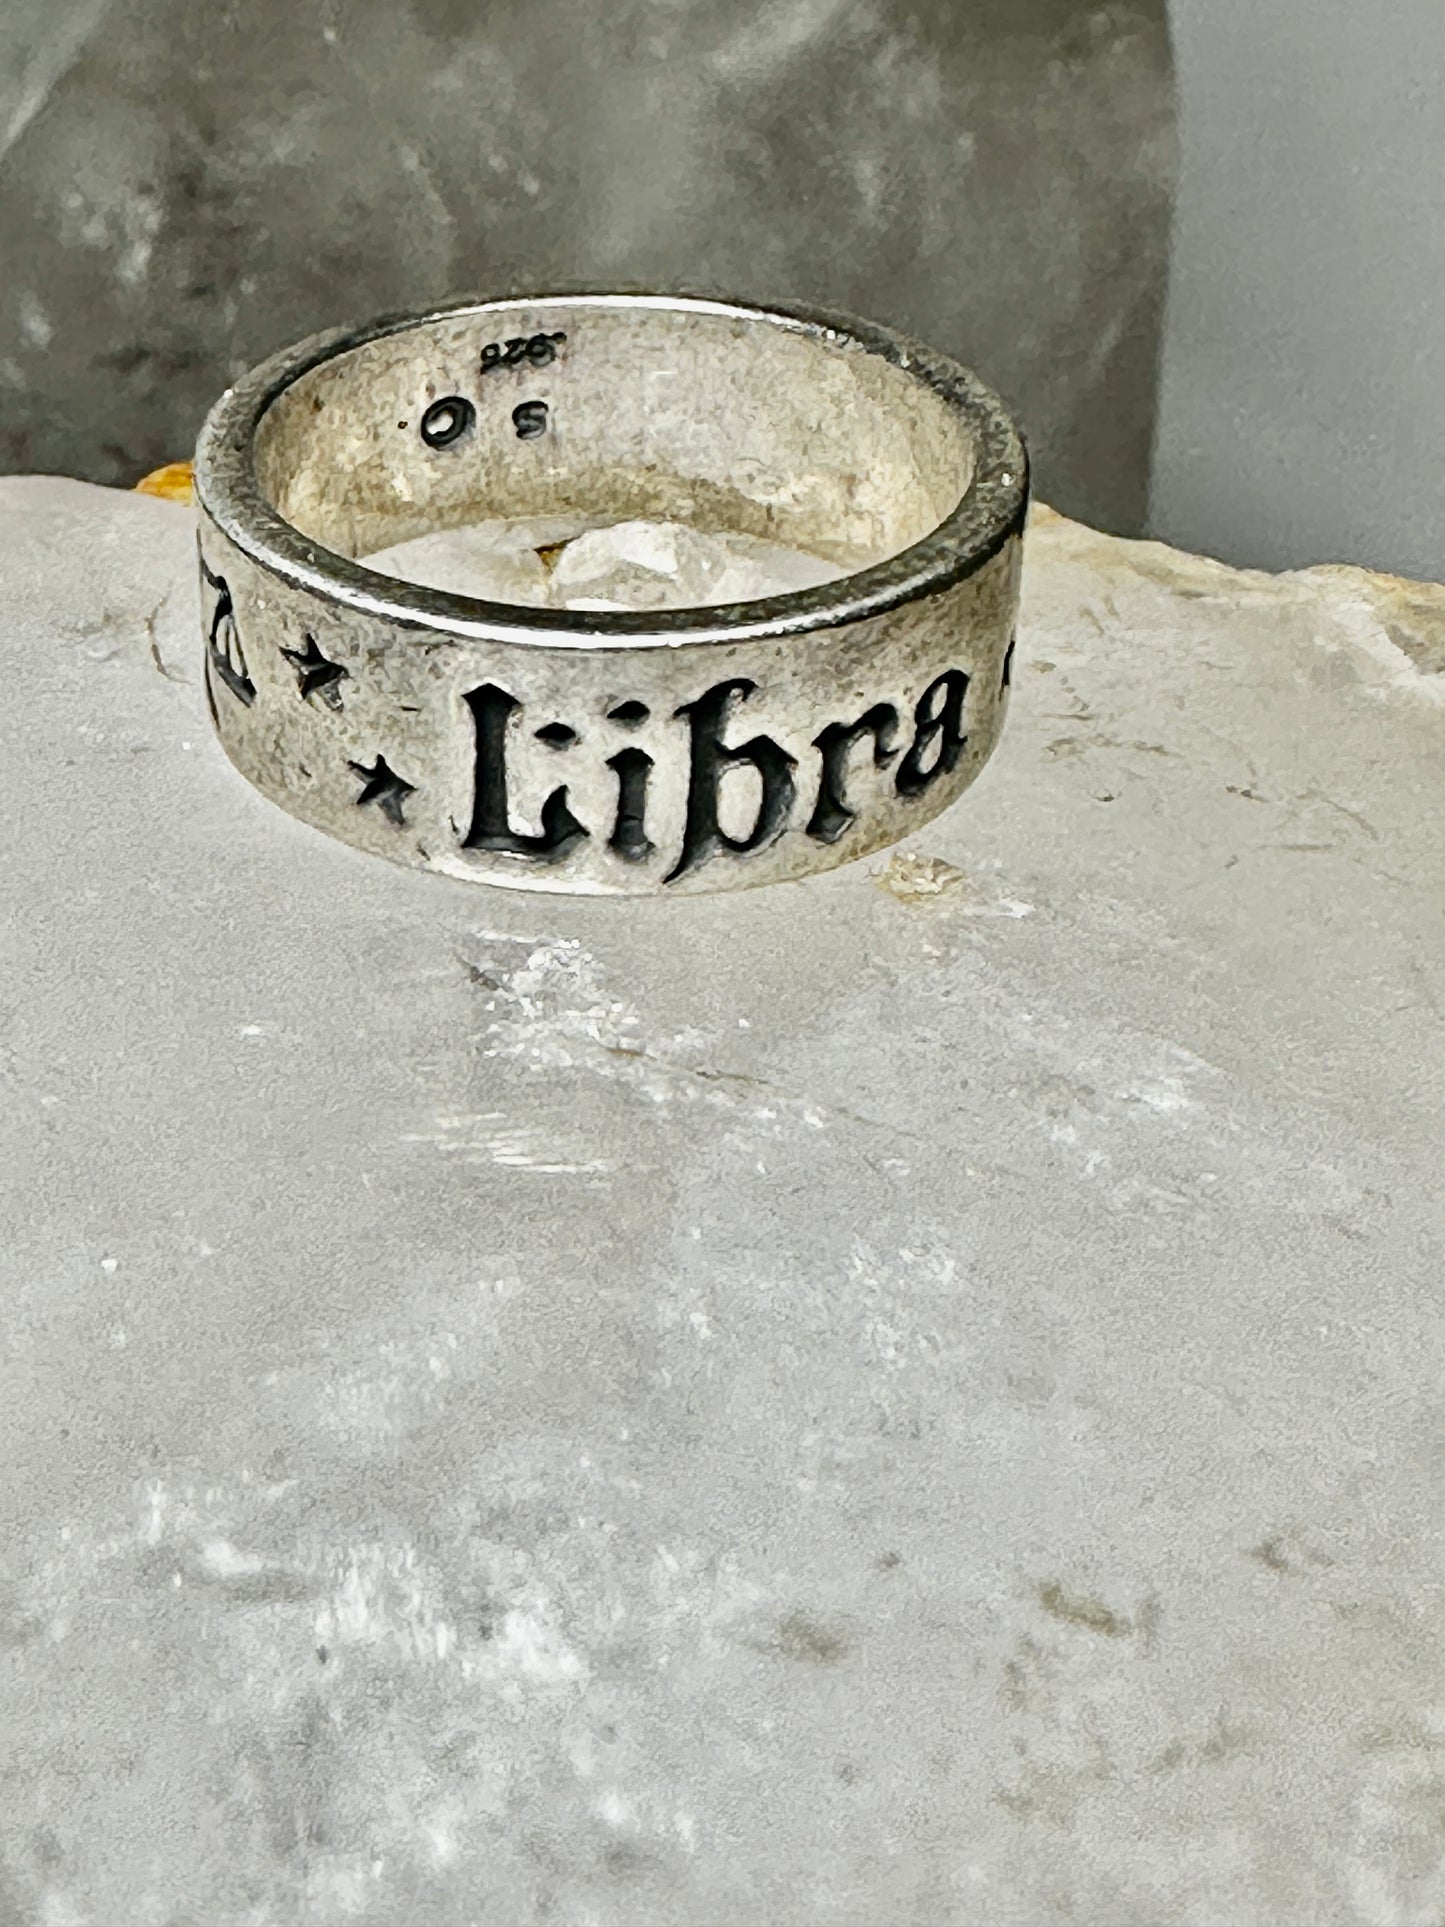 Libra ring scale of Justice band Lawyer Astrology sterling silver Birthday size 8.50 women men